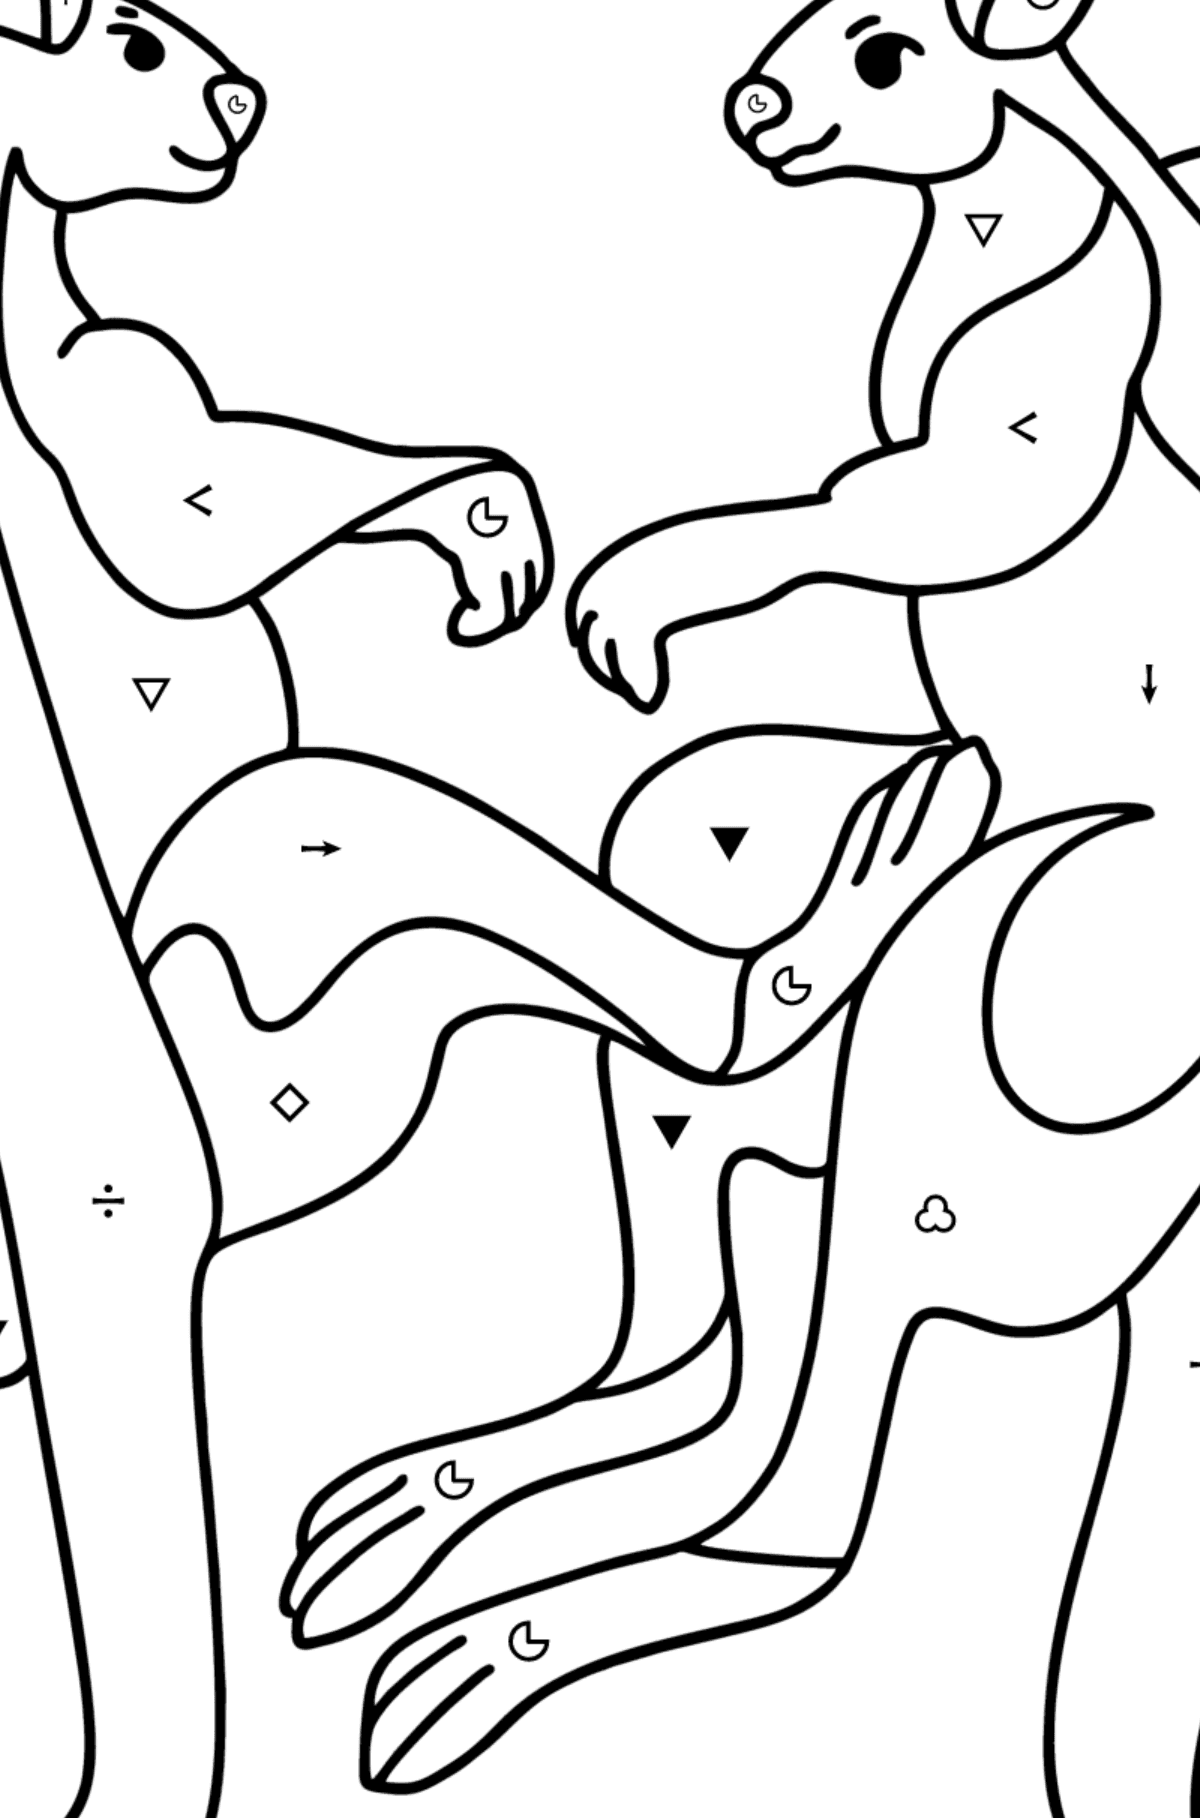 Kangaroo Wrestling coloring page - Coloring by Symbols and Geometric Shapes for Kids